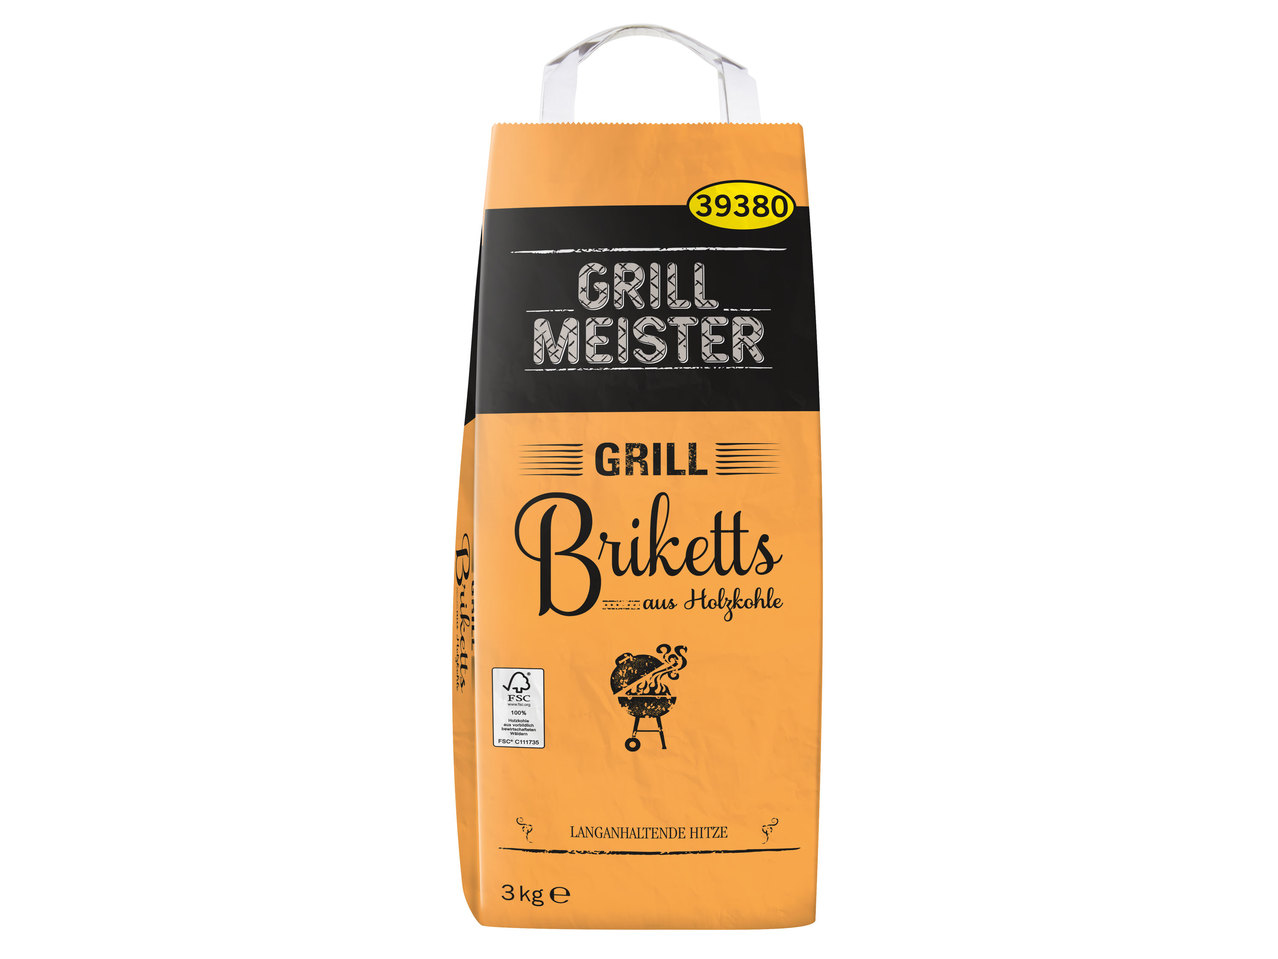 GRILLMEISTER Grill-Briketts